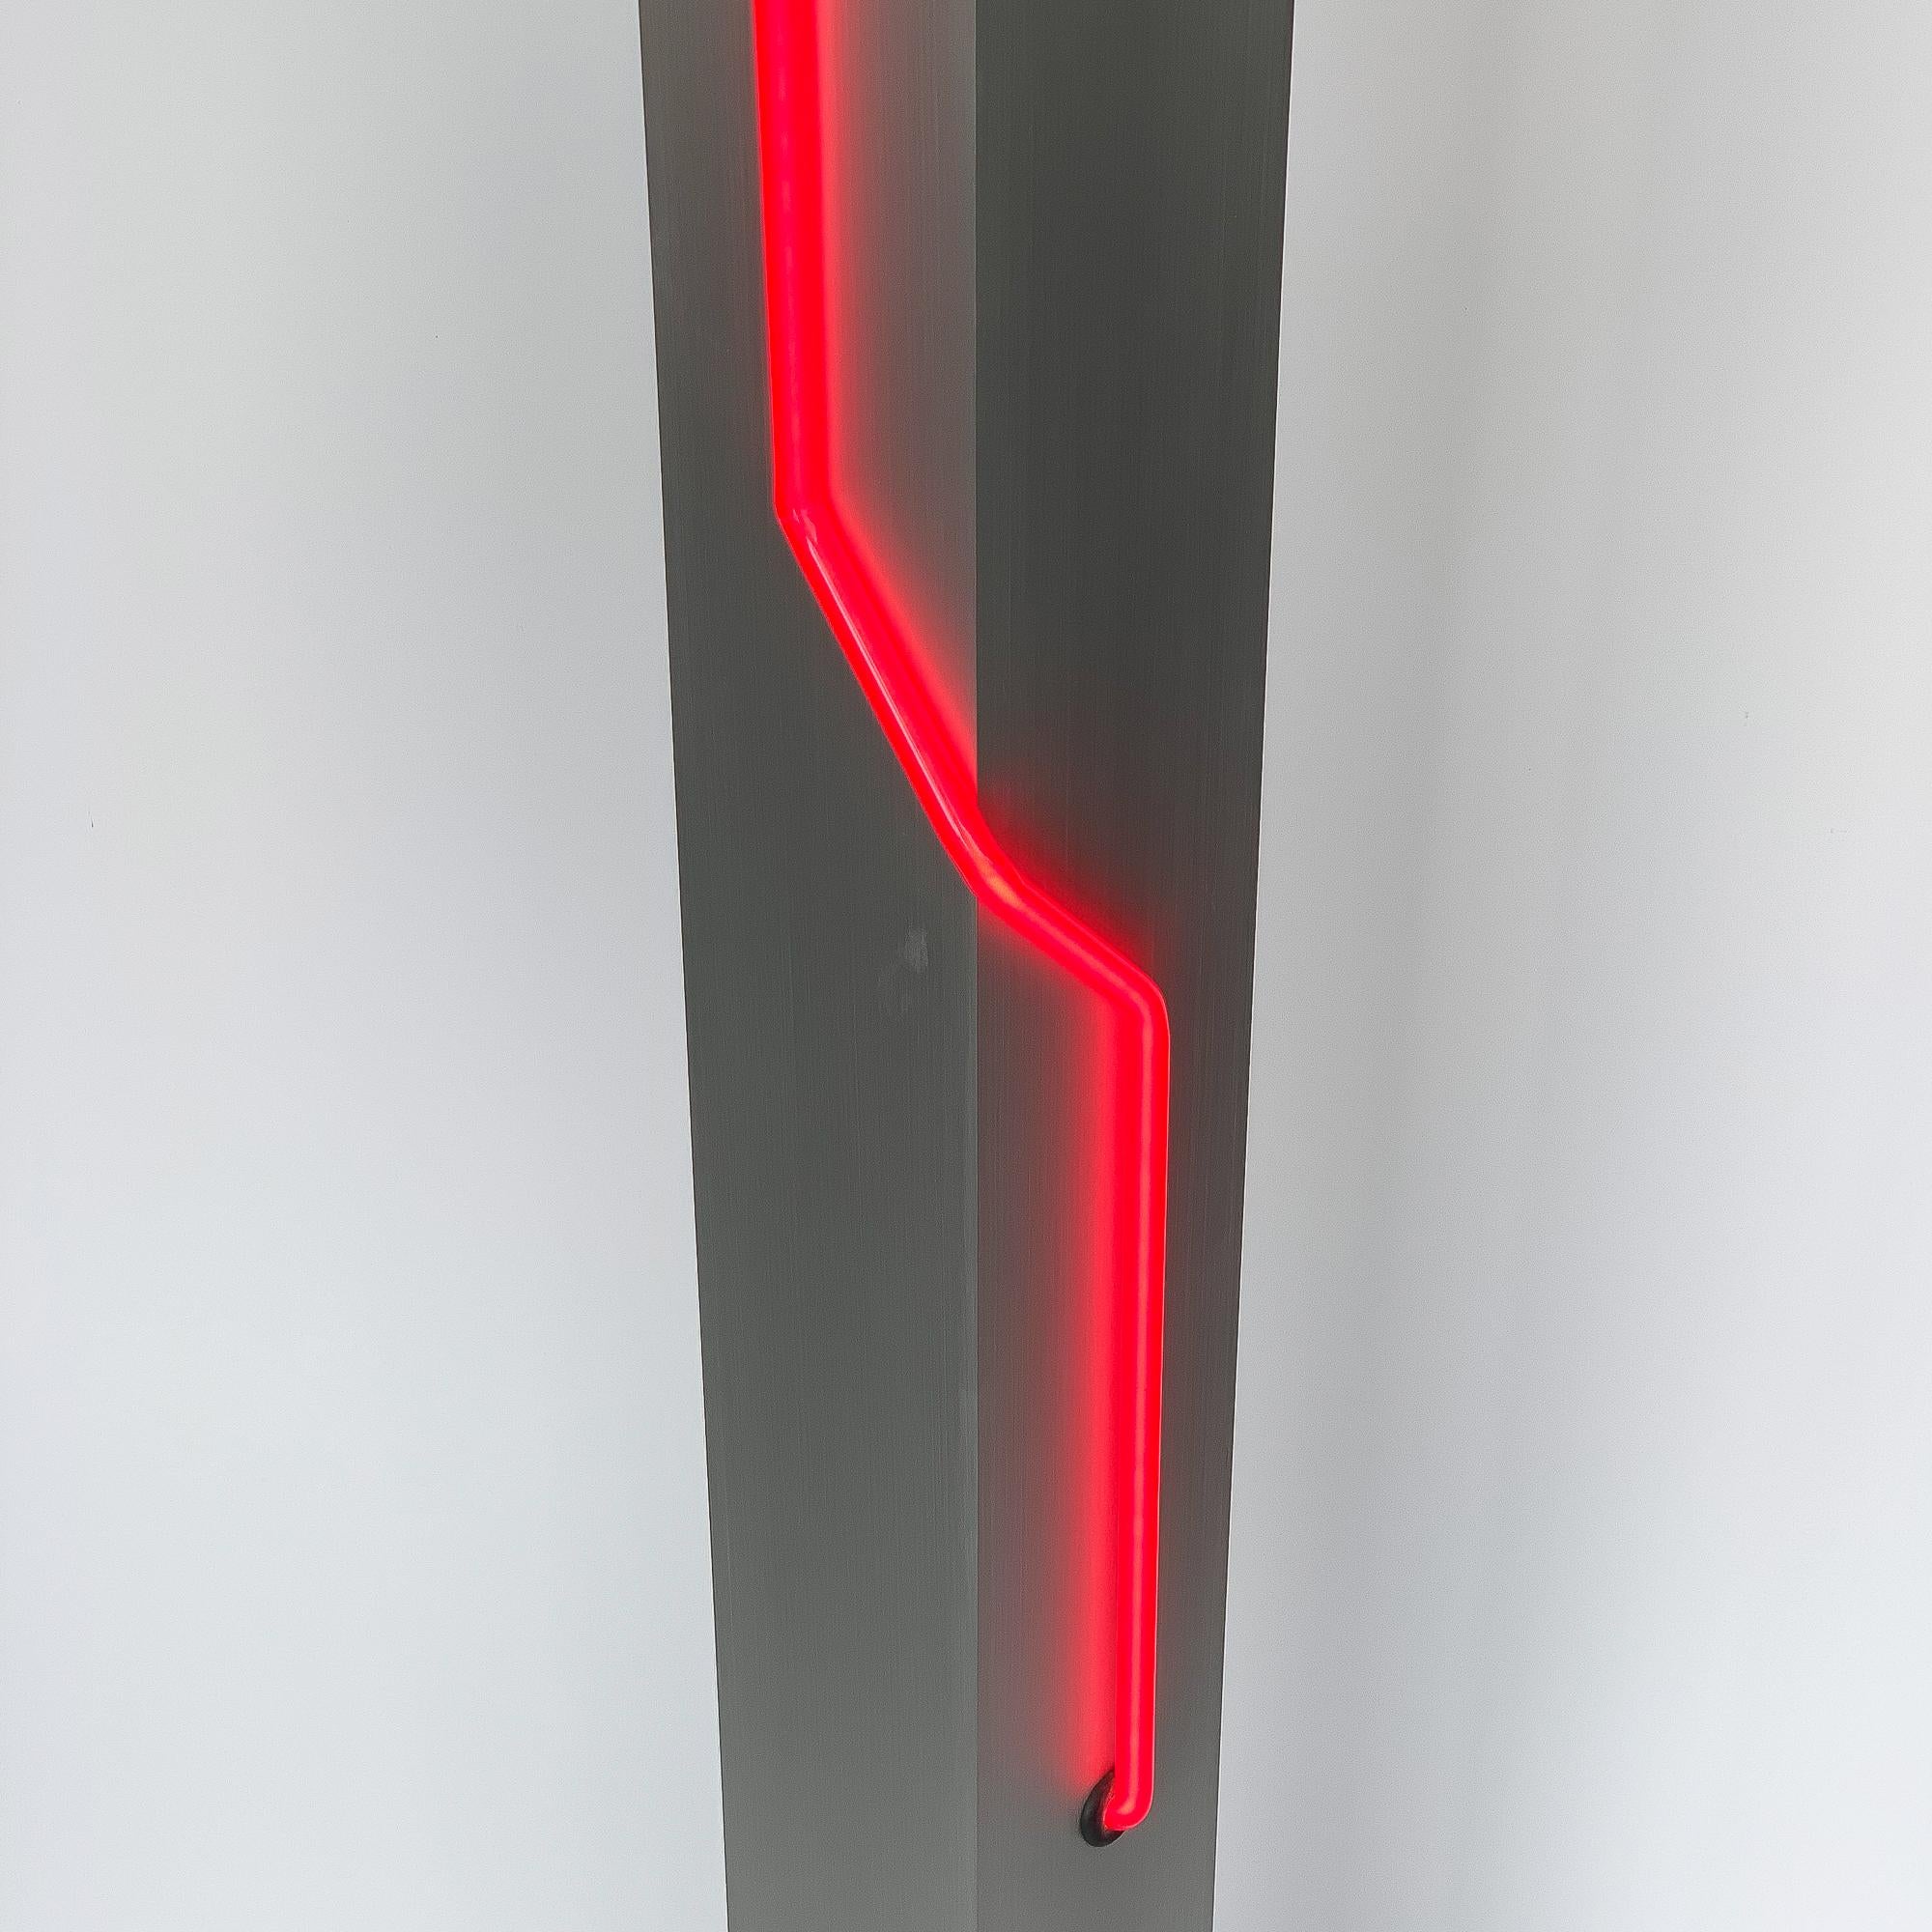 American Rare Red Neon and Aluminum Floor Lamp by Rudi Stern and Don Chelsea for Kovacs